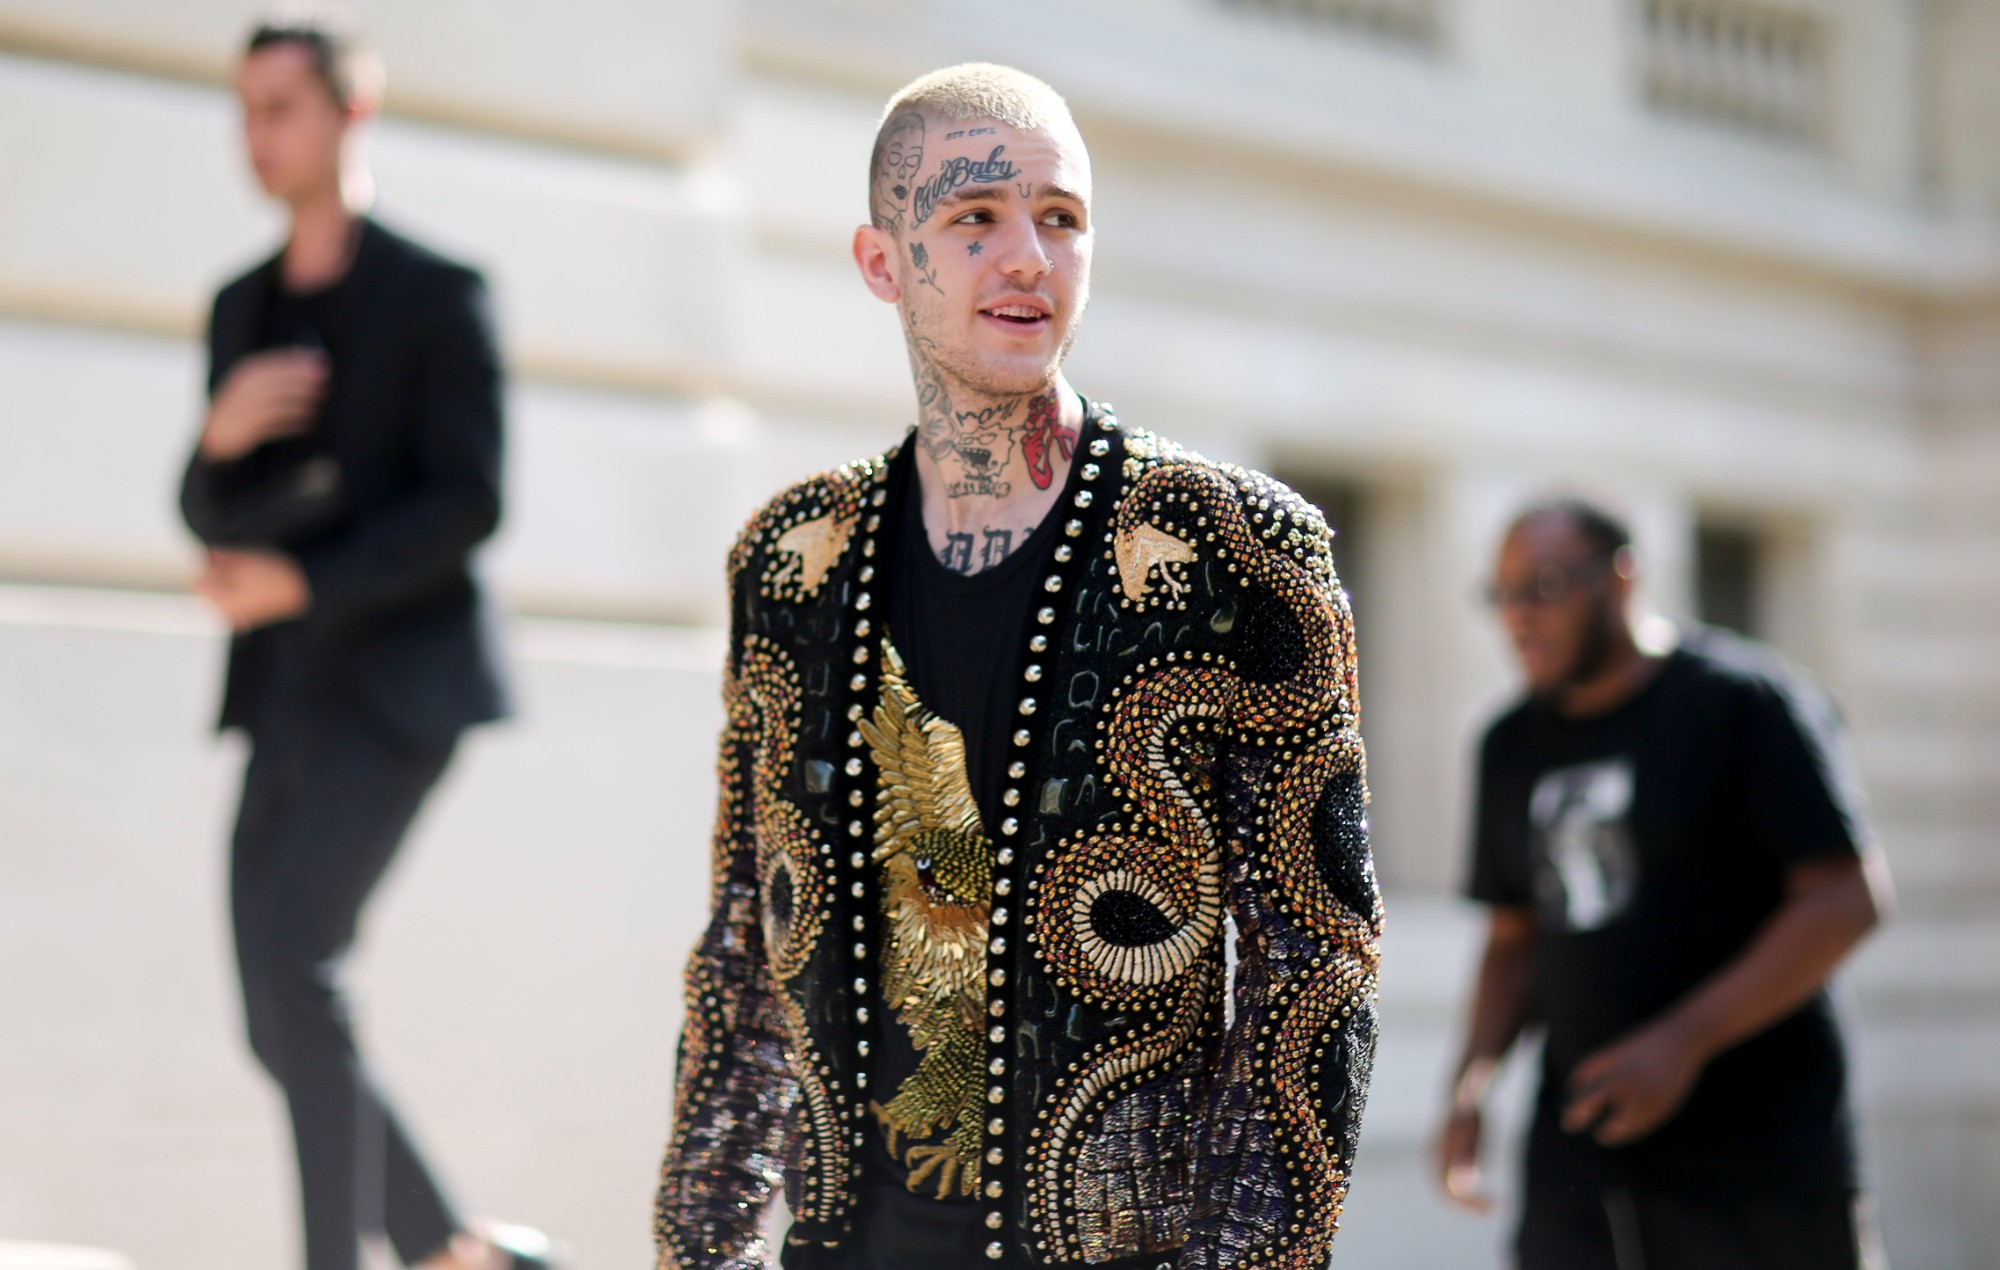 Lil Peep’s mother reaches settlement in wrongful death lawsuit against First Access Entertainment